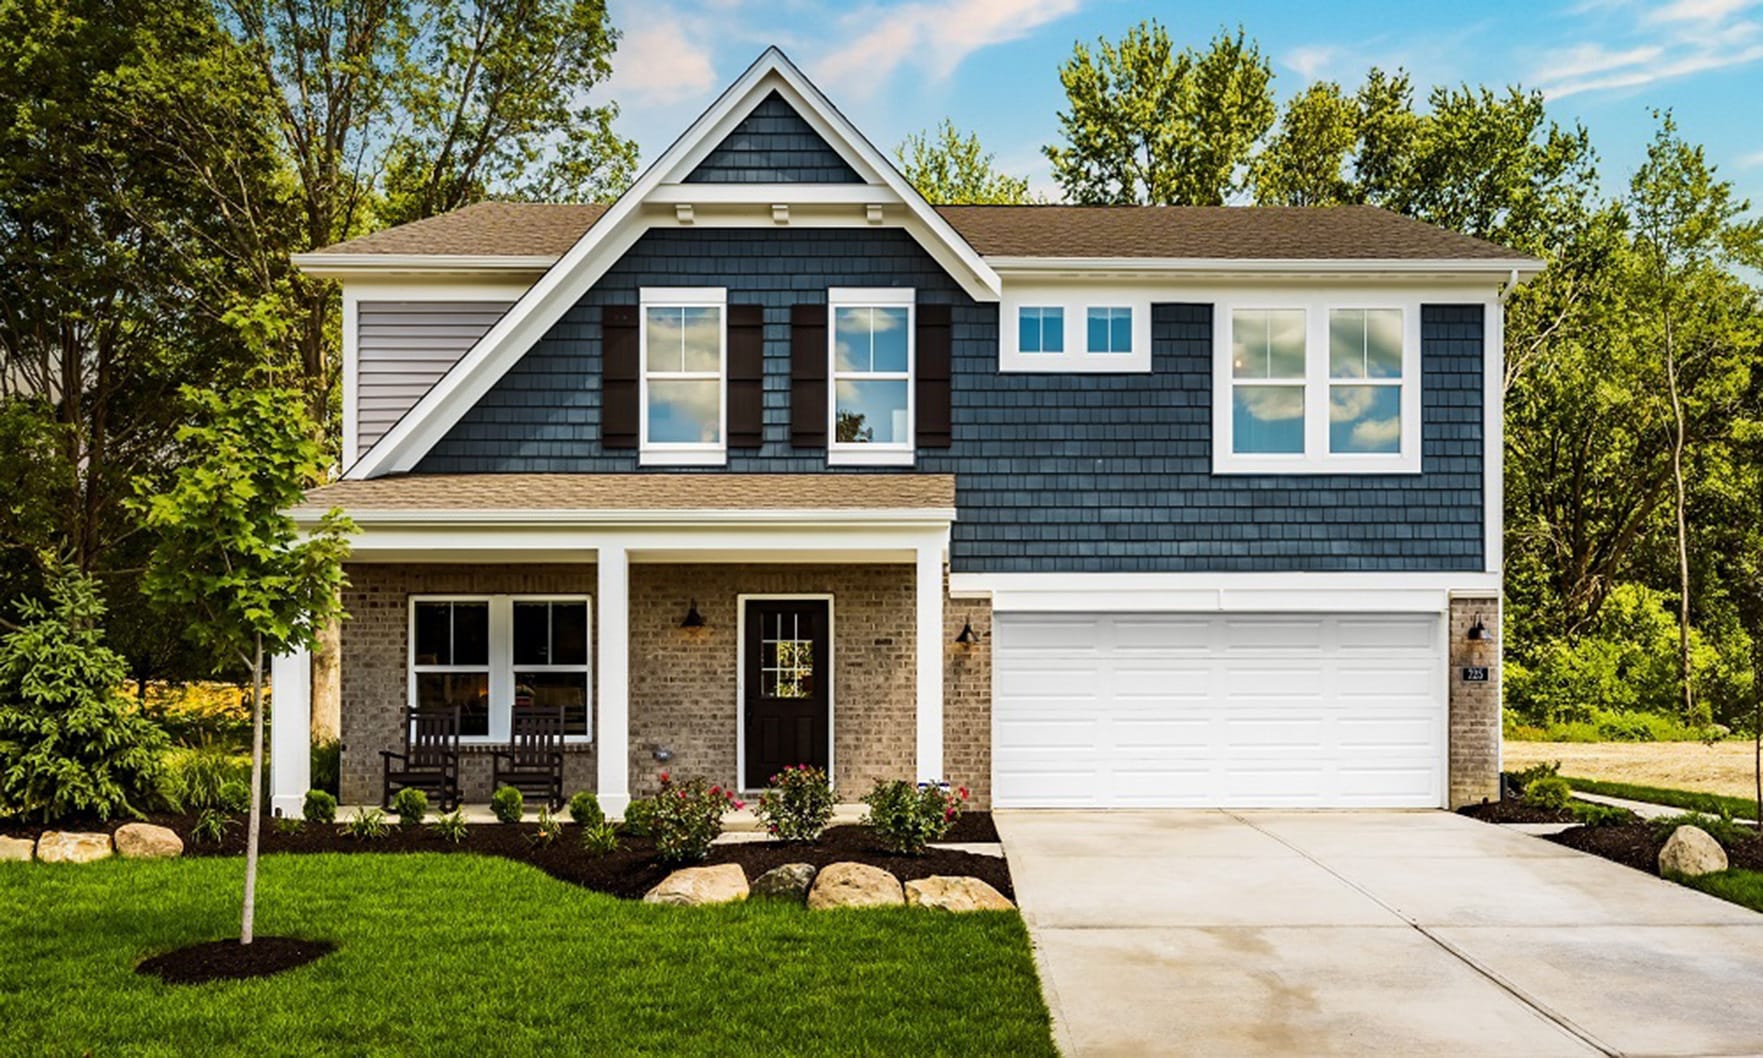 Fischer Homes To Open S At 76 Home Dallas Community This Fall Atlanta Agent Magazine